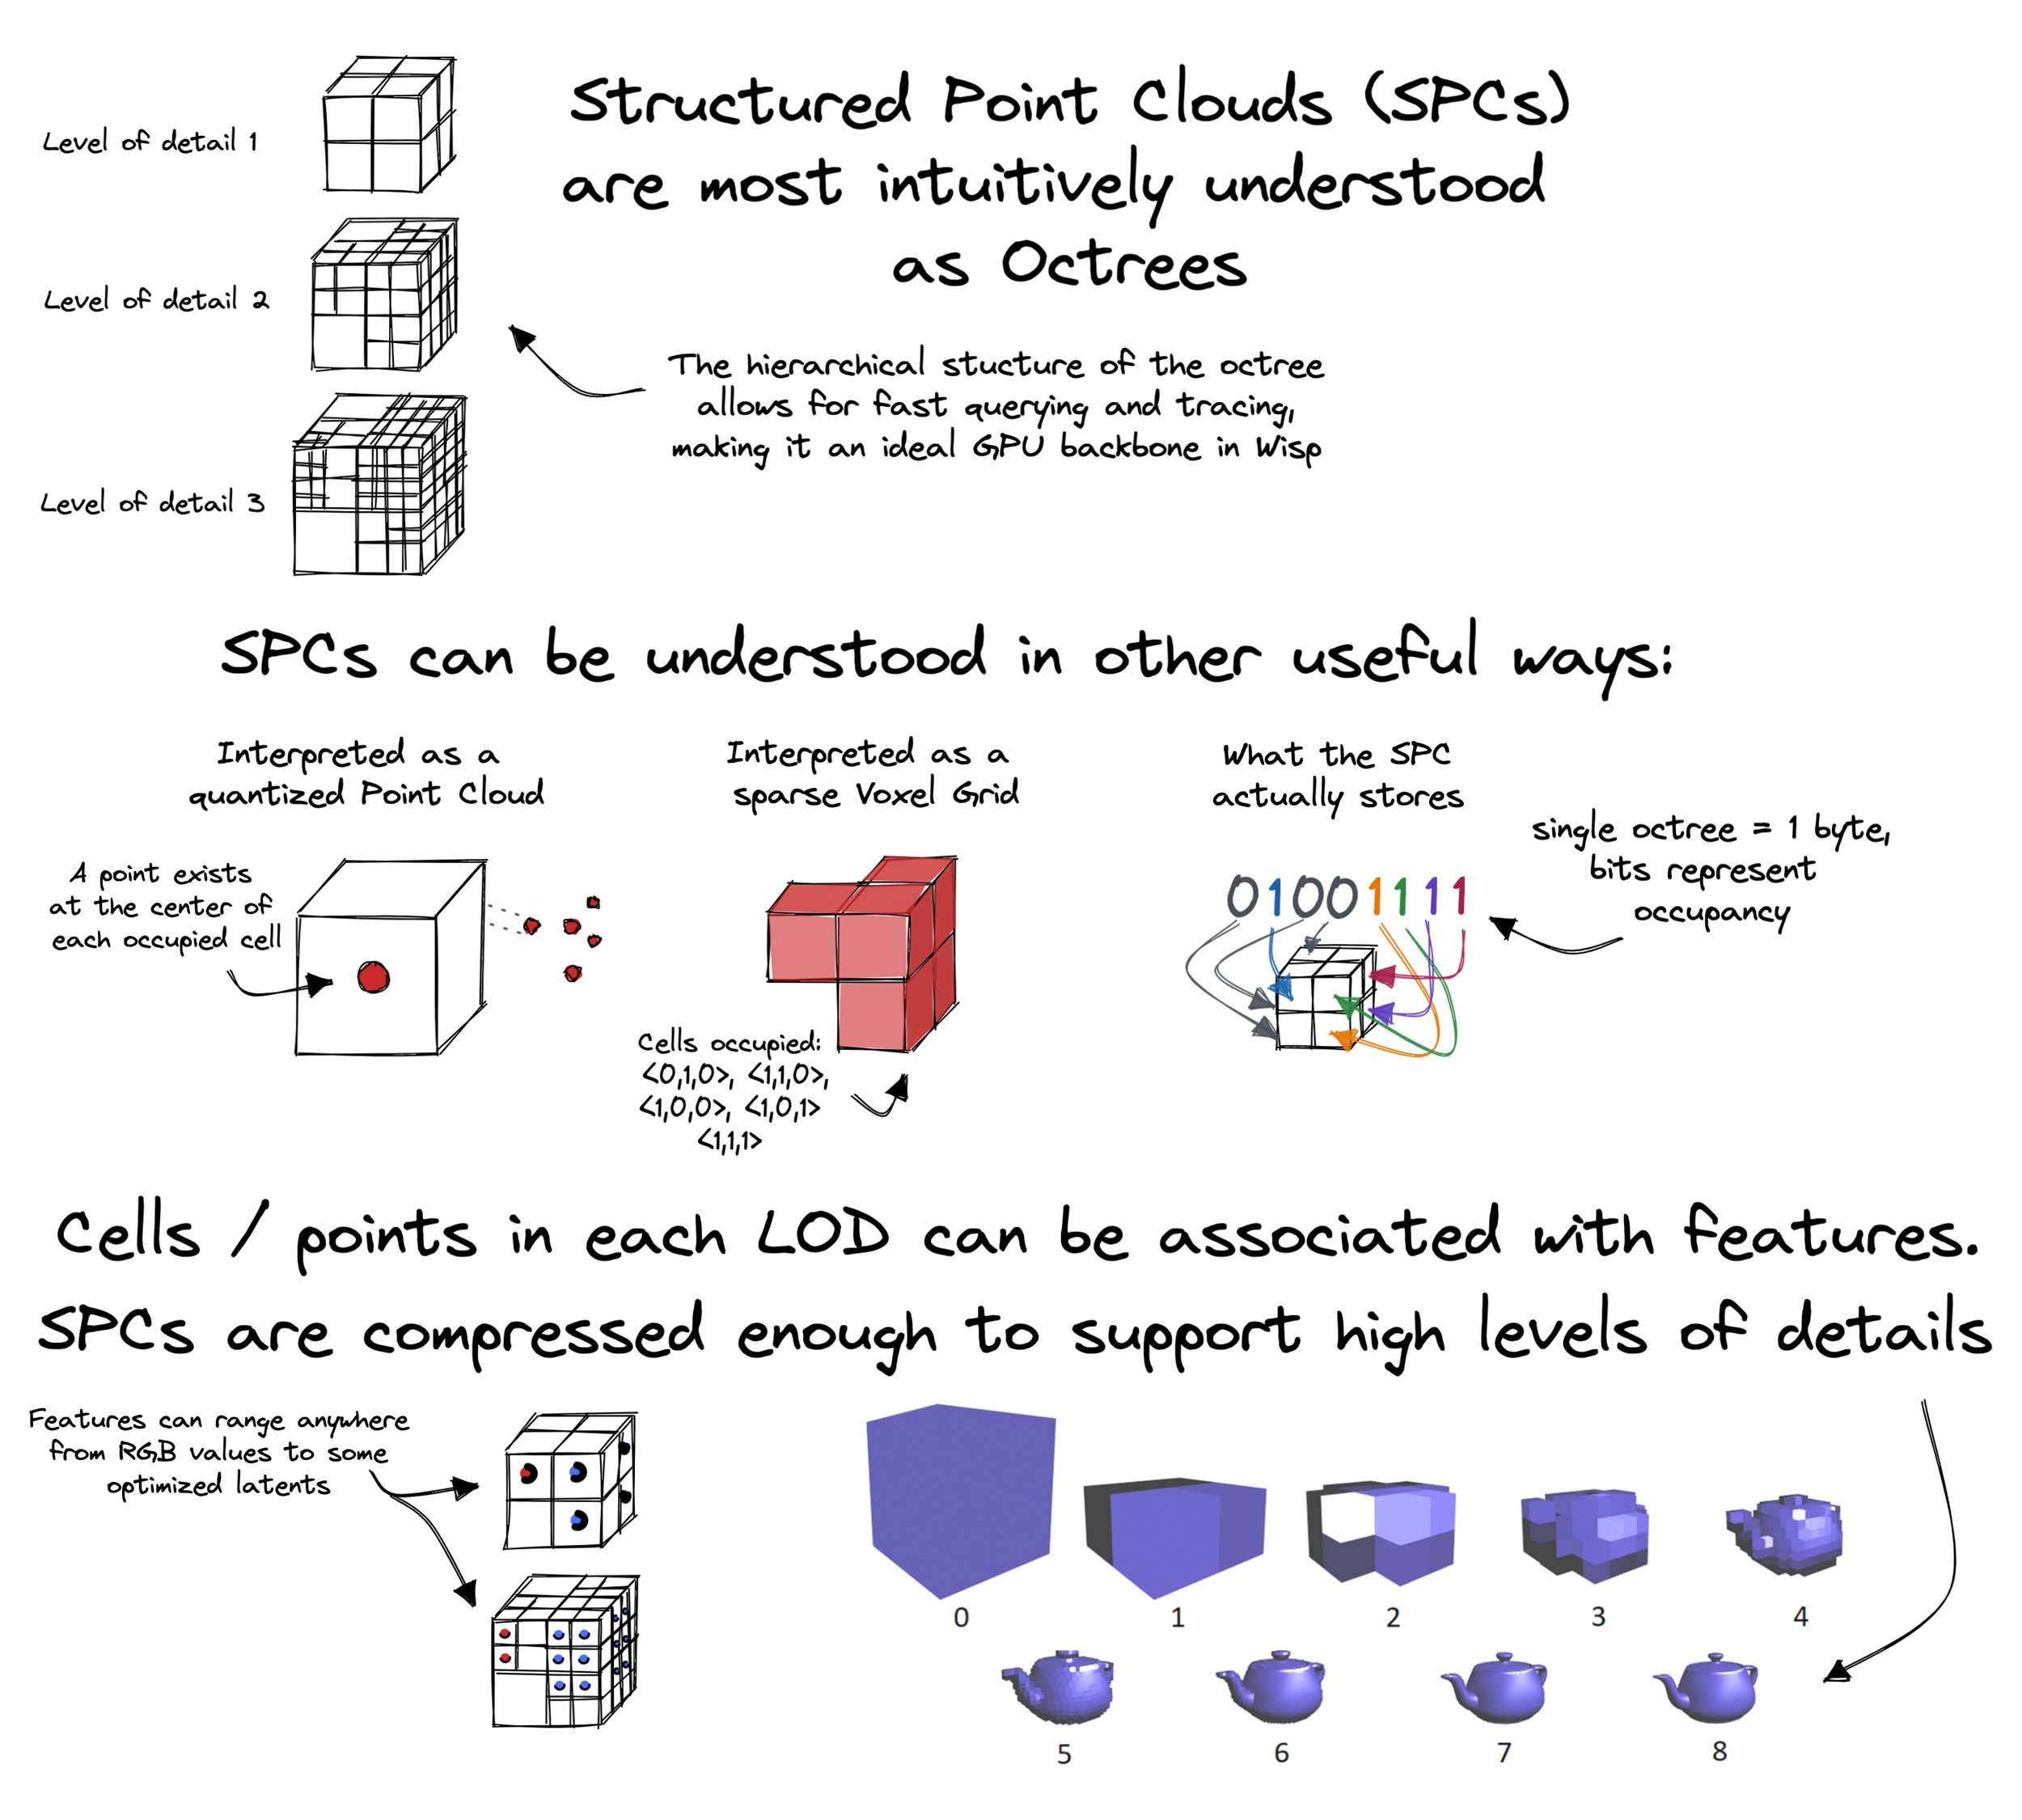 Structured Point Clouds